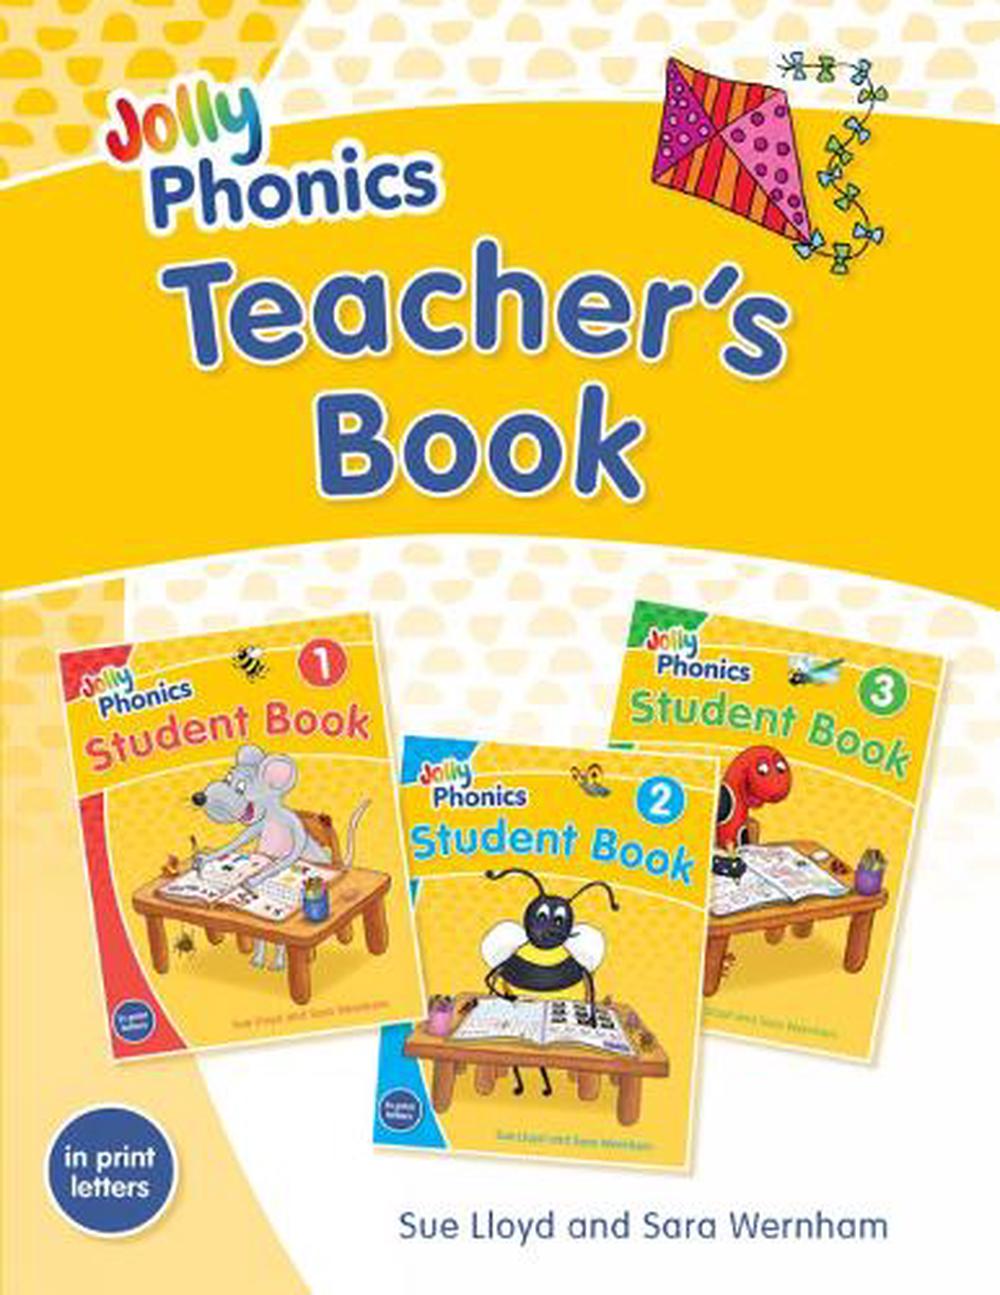 The　Phonics　Book　by　at　9781844147274　Sara　online　Wernham,　Buy　Paperback,　Nile　Jolly　Teacher's